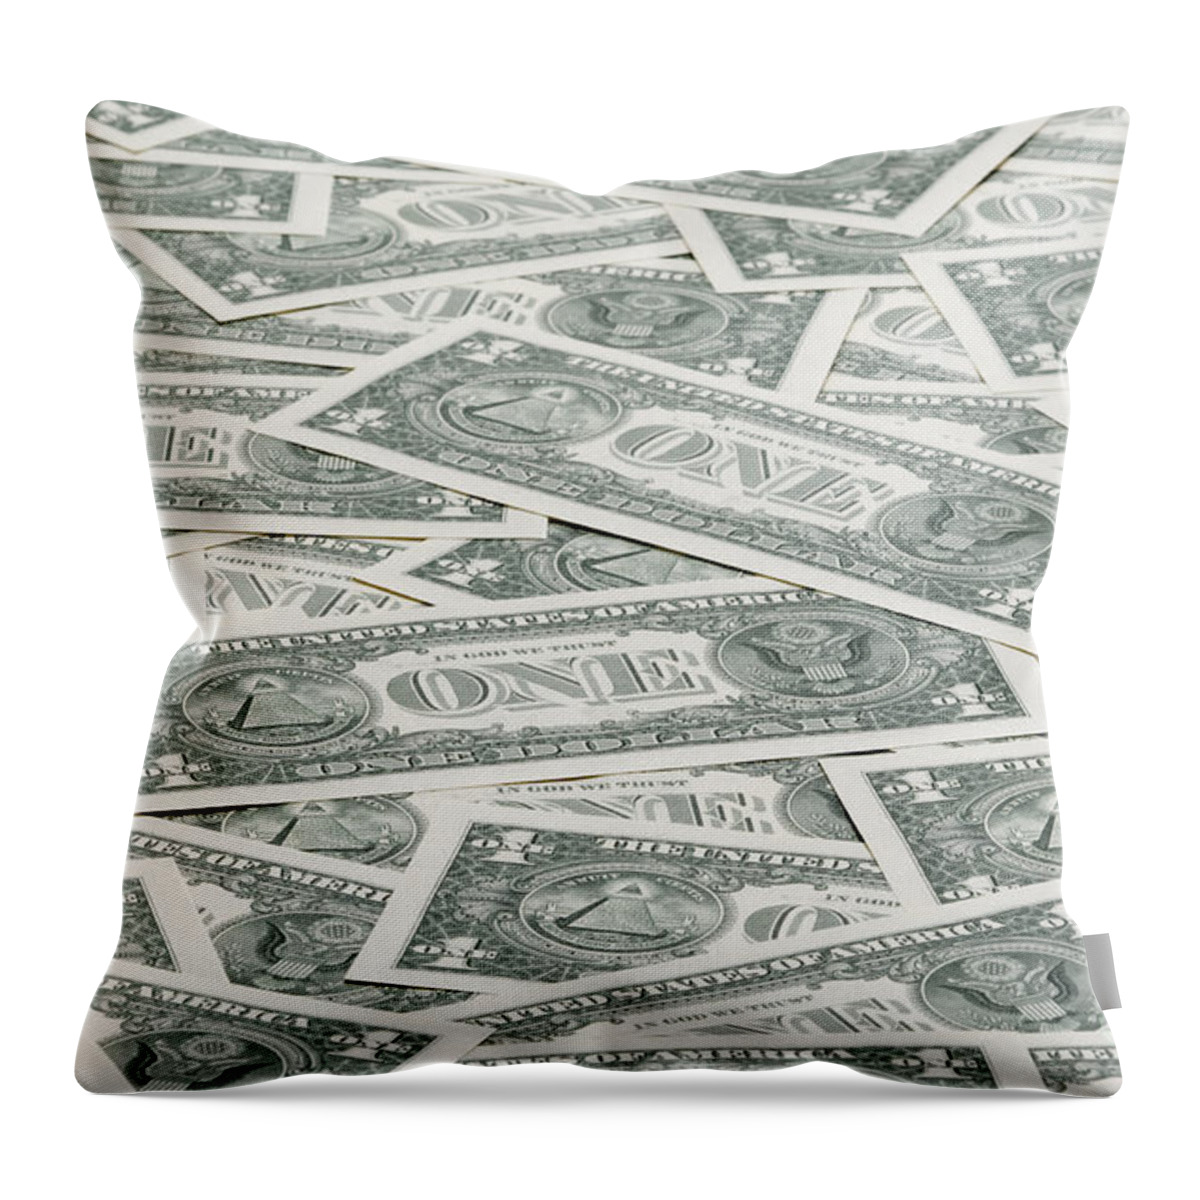 America Throw Pillow featuring the photograph Carpet Of One Dollar Bills #1 by Lee Avison